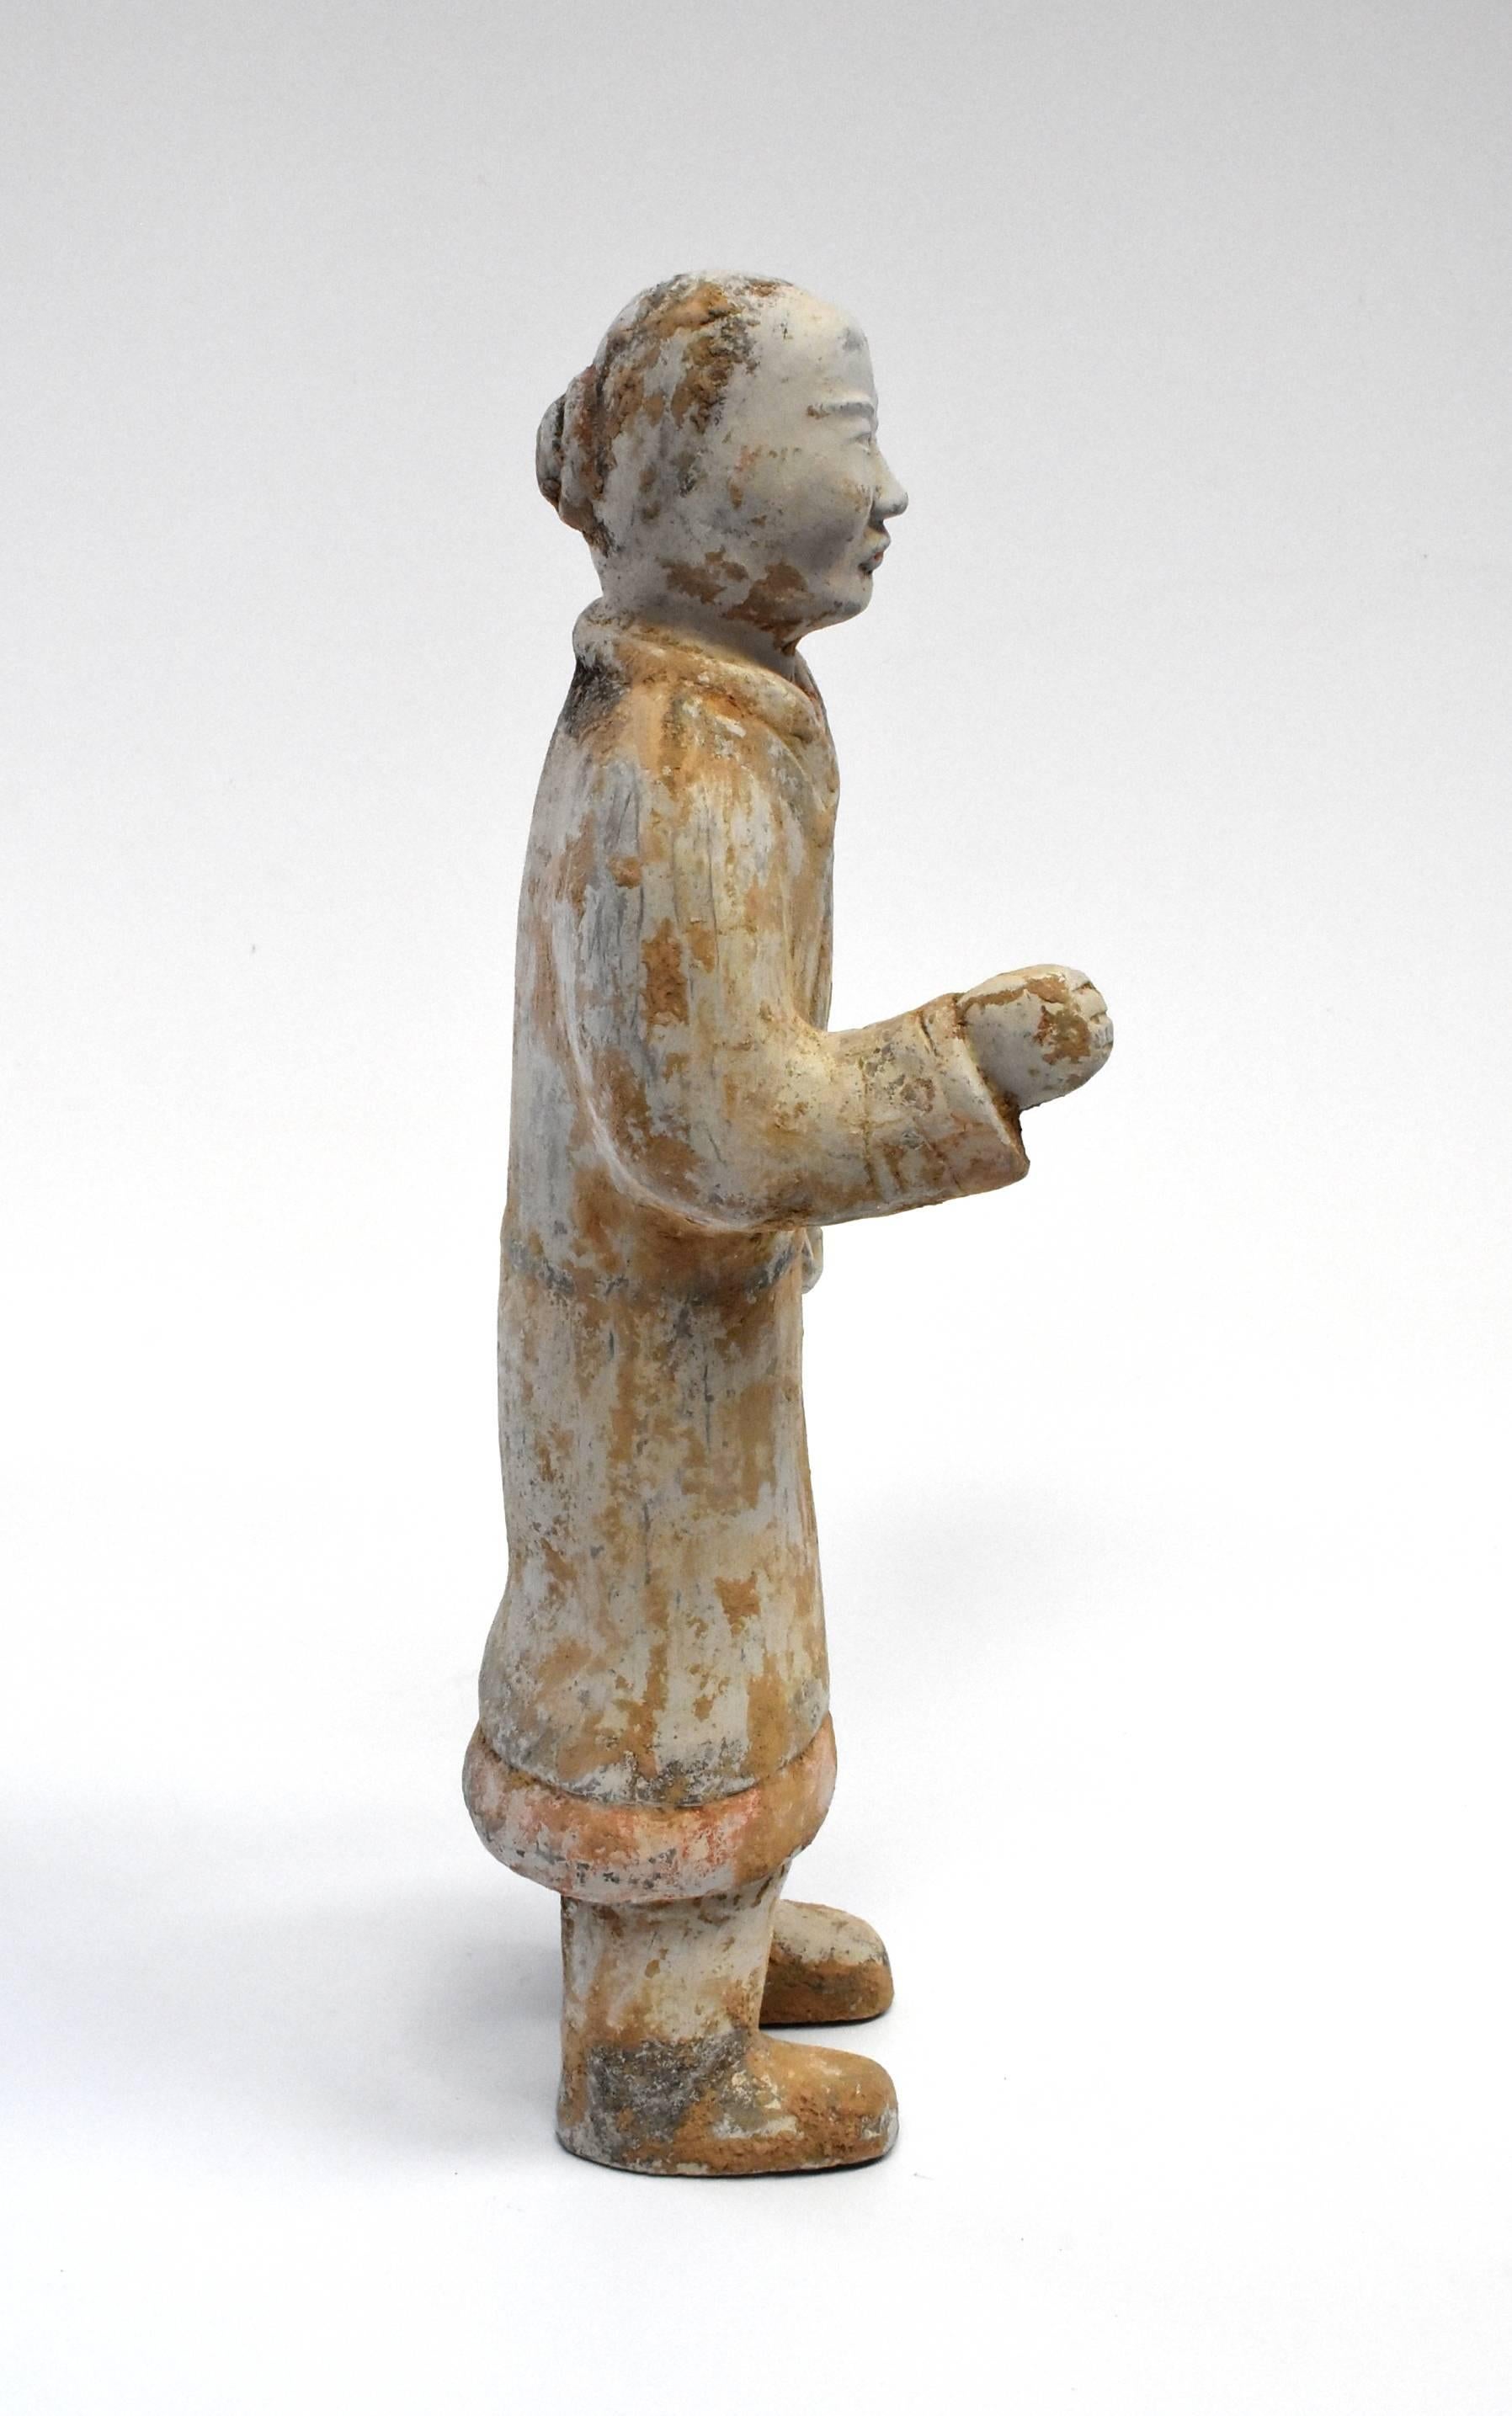 A fantastic Han style terracotta figure. Such a figure is seen in the Han dynasty dating 206 BC-220 AD. The figure appears to be a servant or a hostler. His hair is in a bun and wears layers of wrap robes, all consistent with the Han era's style. A